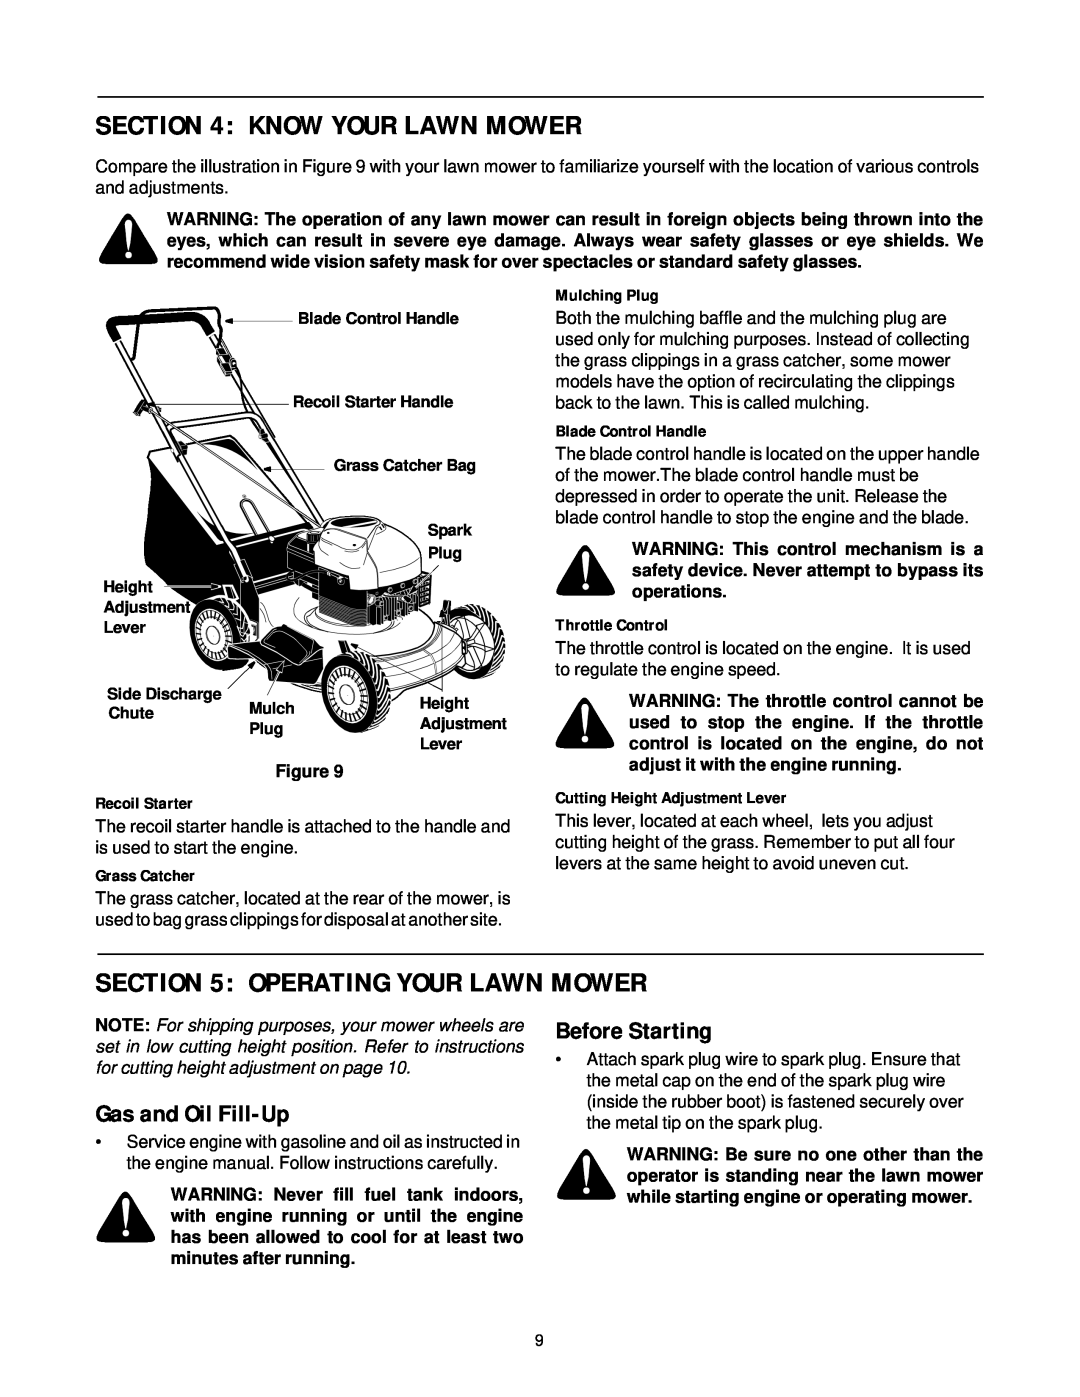 Cub Cadet PR-521 Know Your Lawn Mower, Operating Your Lawn Mower, Gas and Oil Fill-Up, Before Starting, Mulching Plug 